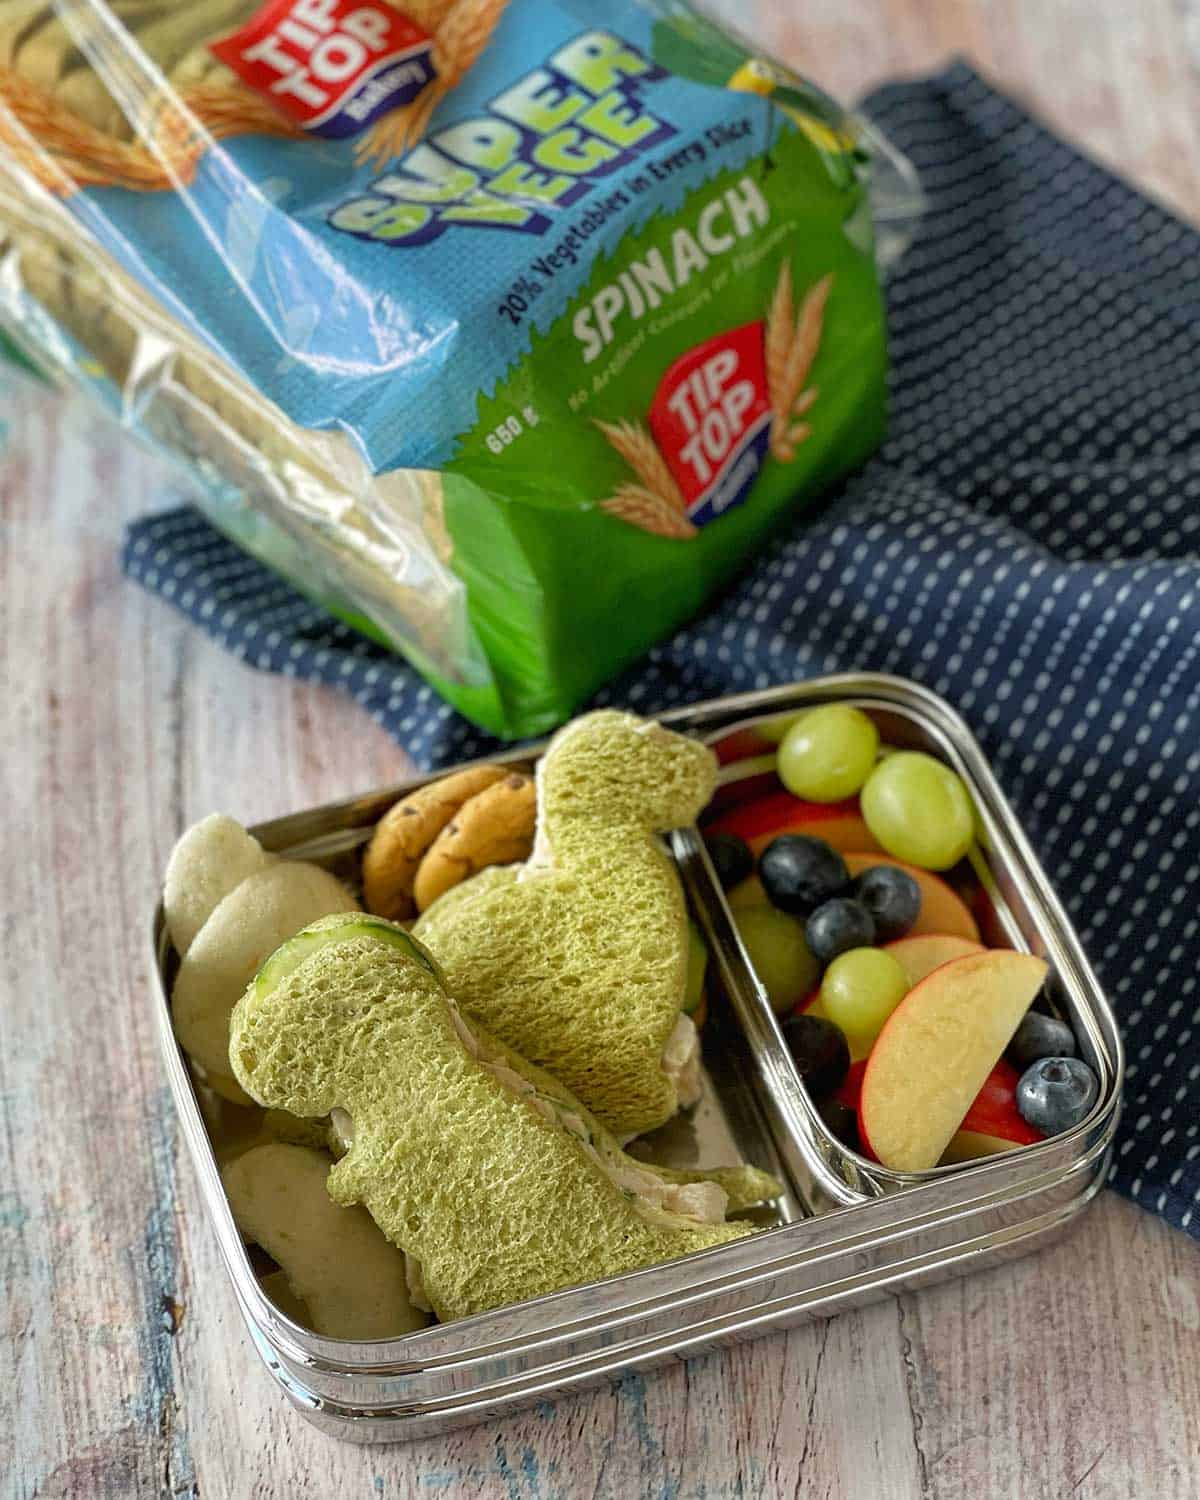 Dinosaur shaped Chicken Salad Sandwiches in a child's lunchbox next to a packet of sandwich bread.